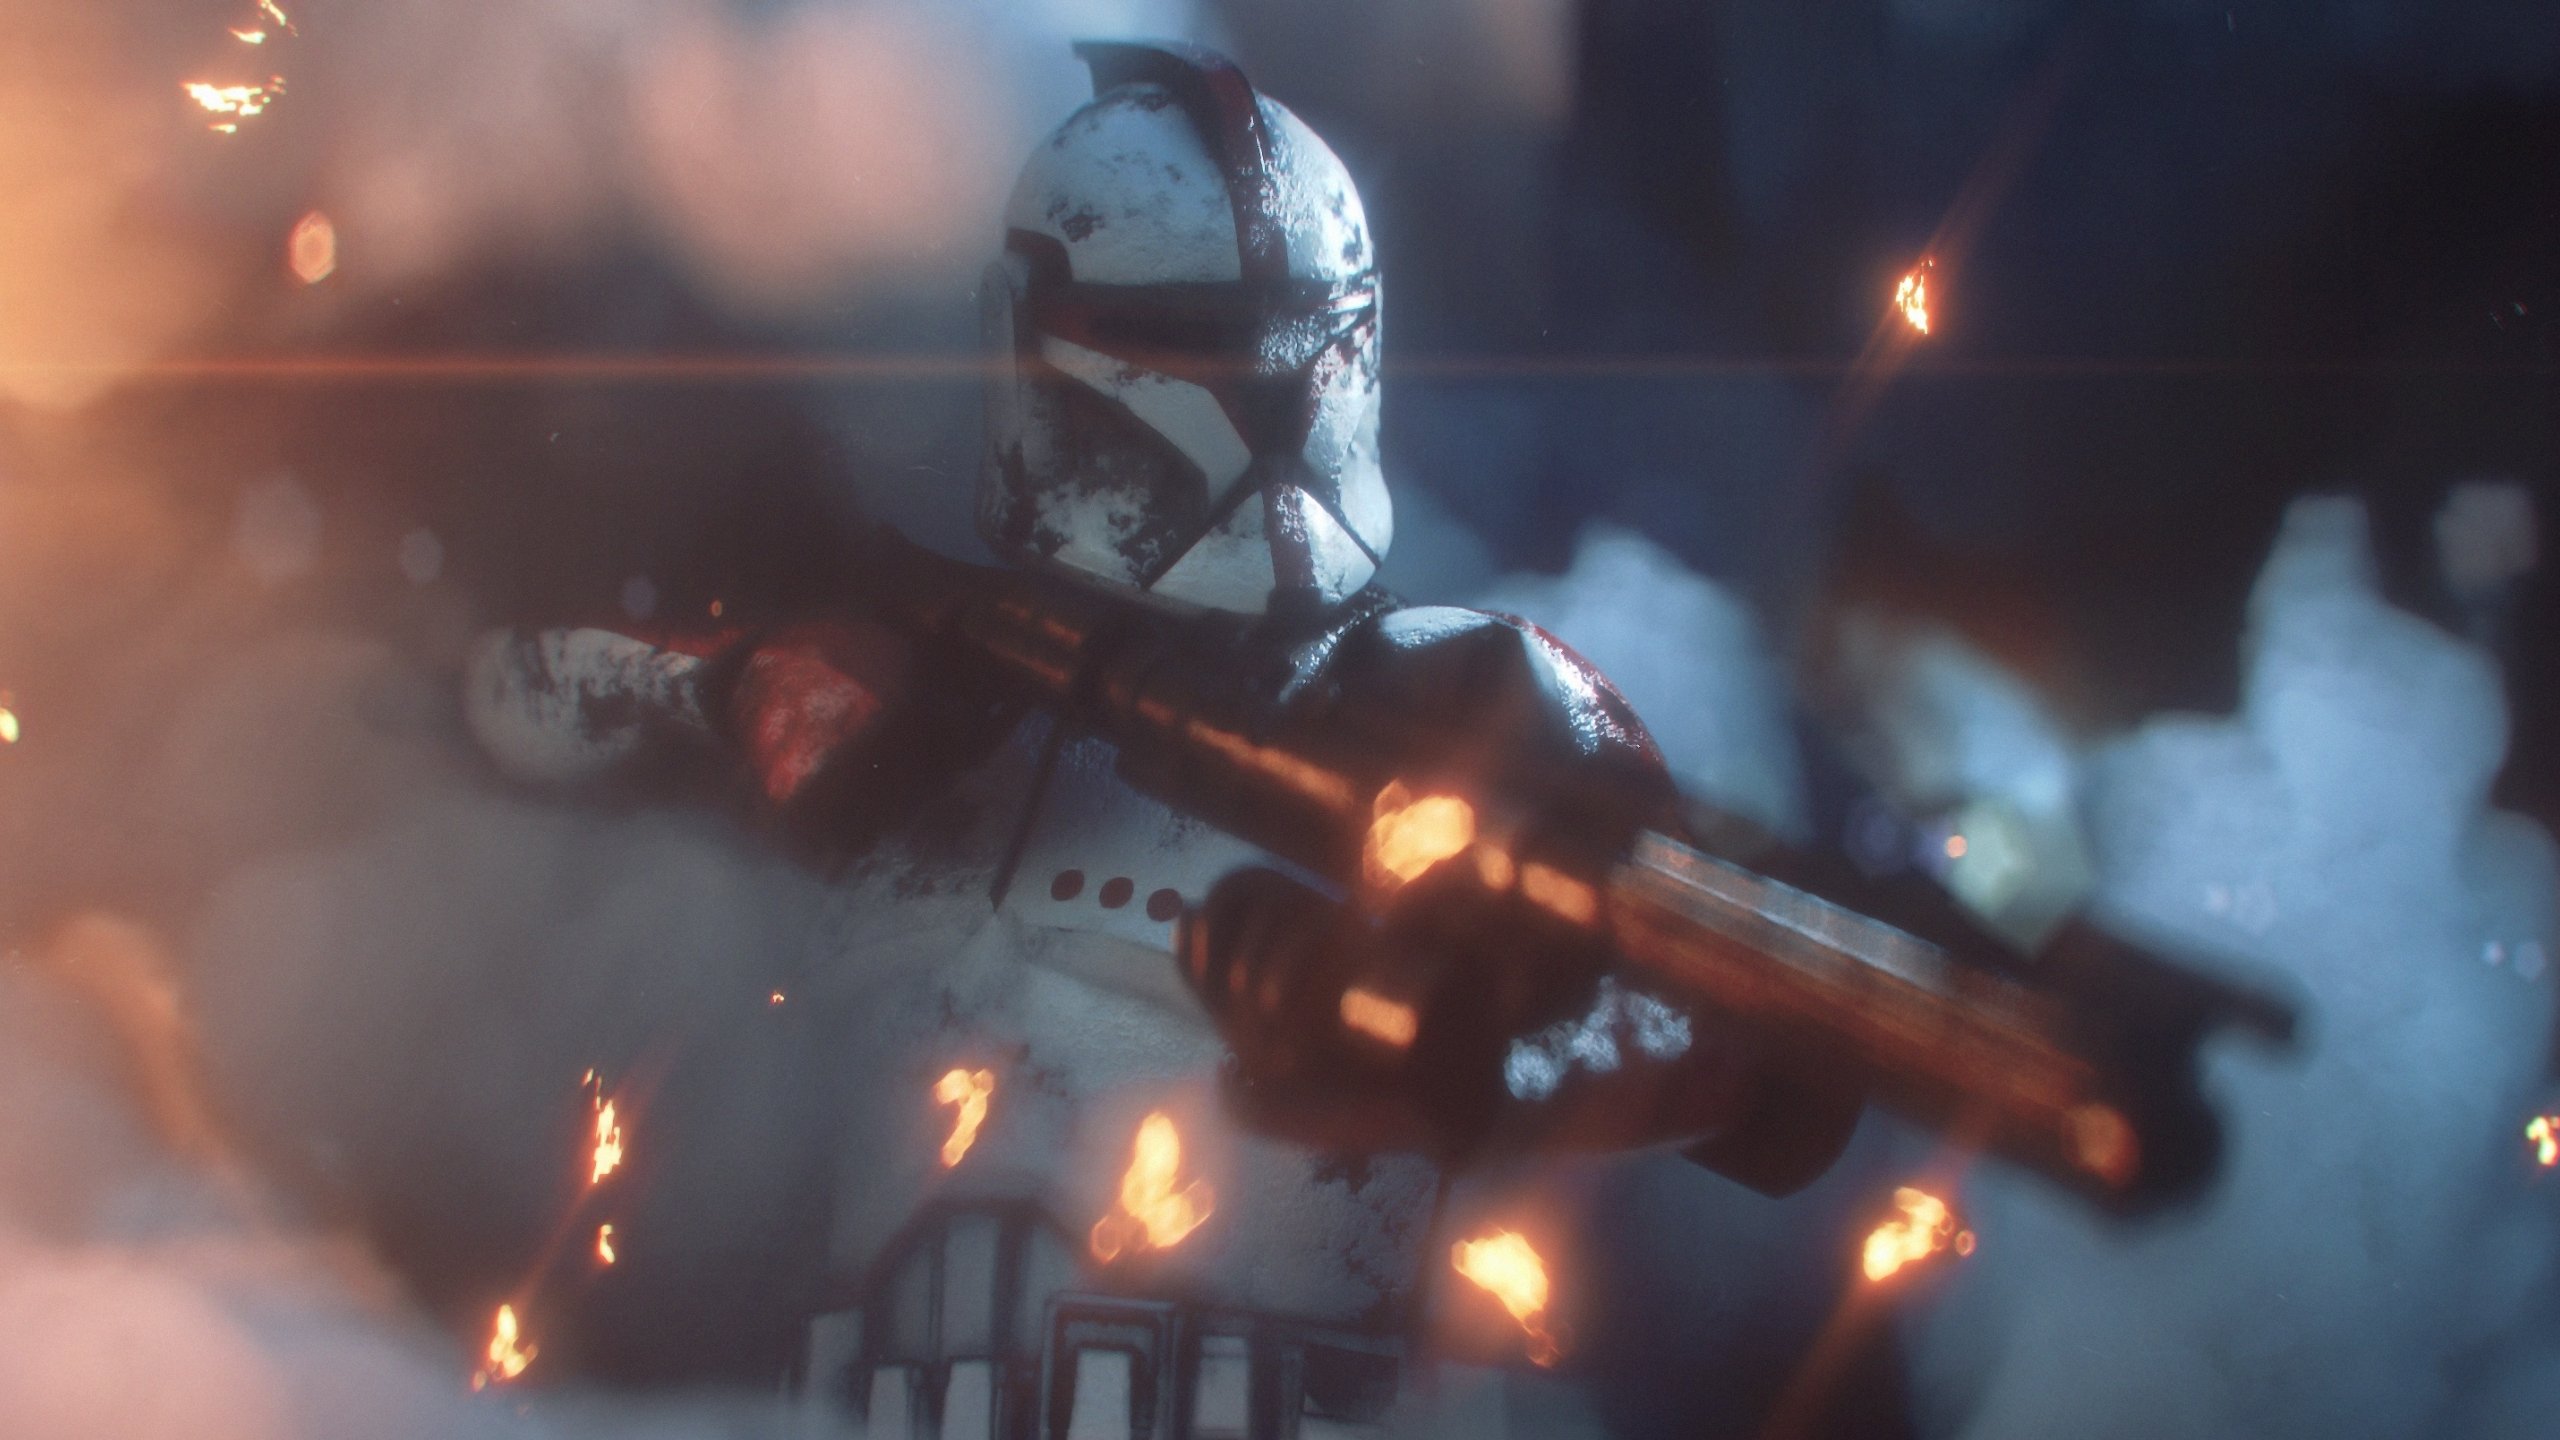 Download video game, star wars, clone trooper 2560x1440 wallpaper, dual wide 16:9 2560x1440 HD image, background, 19713